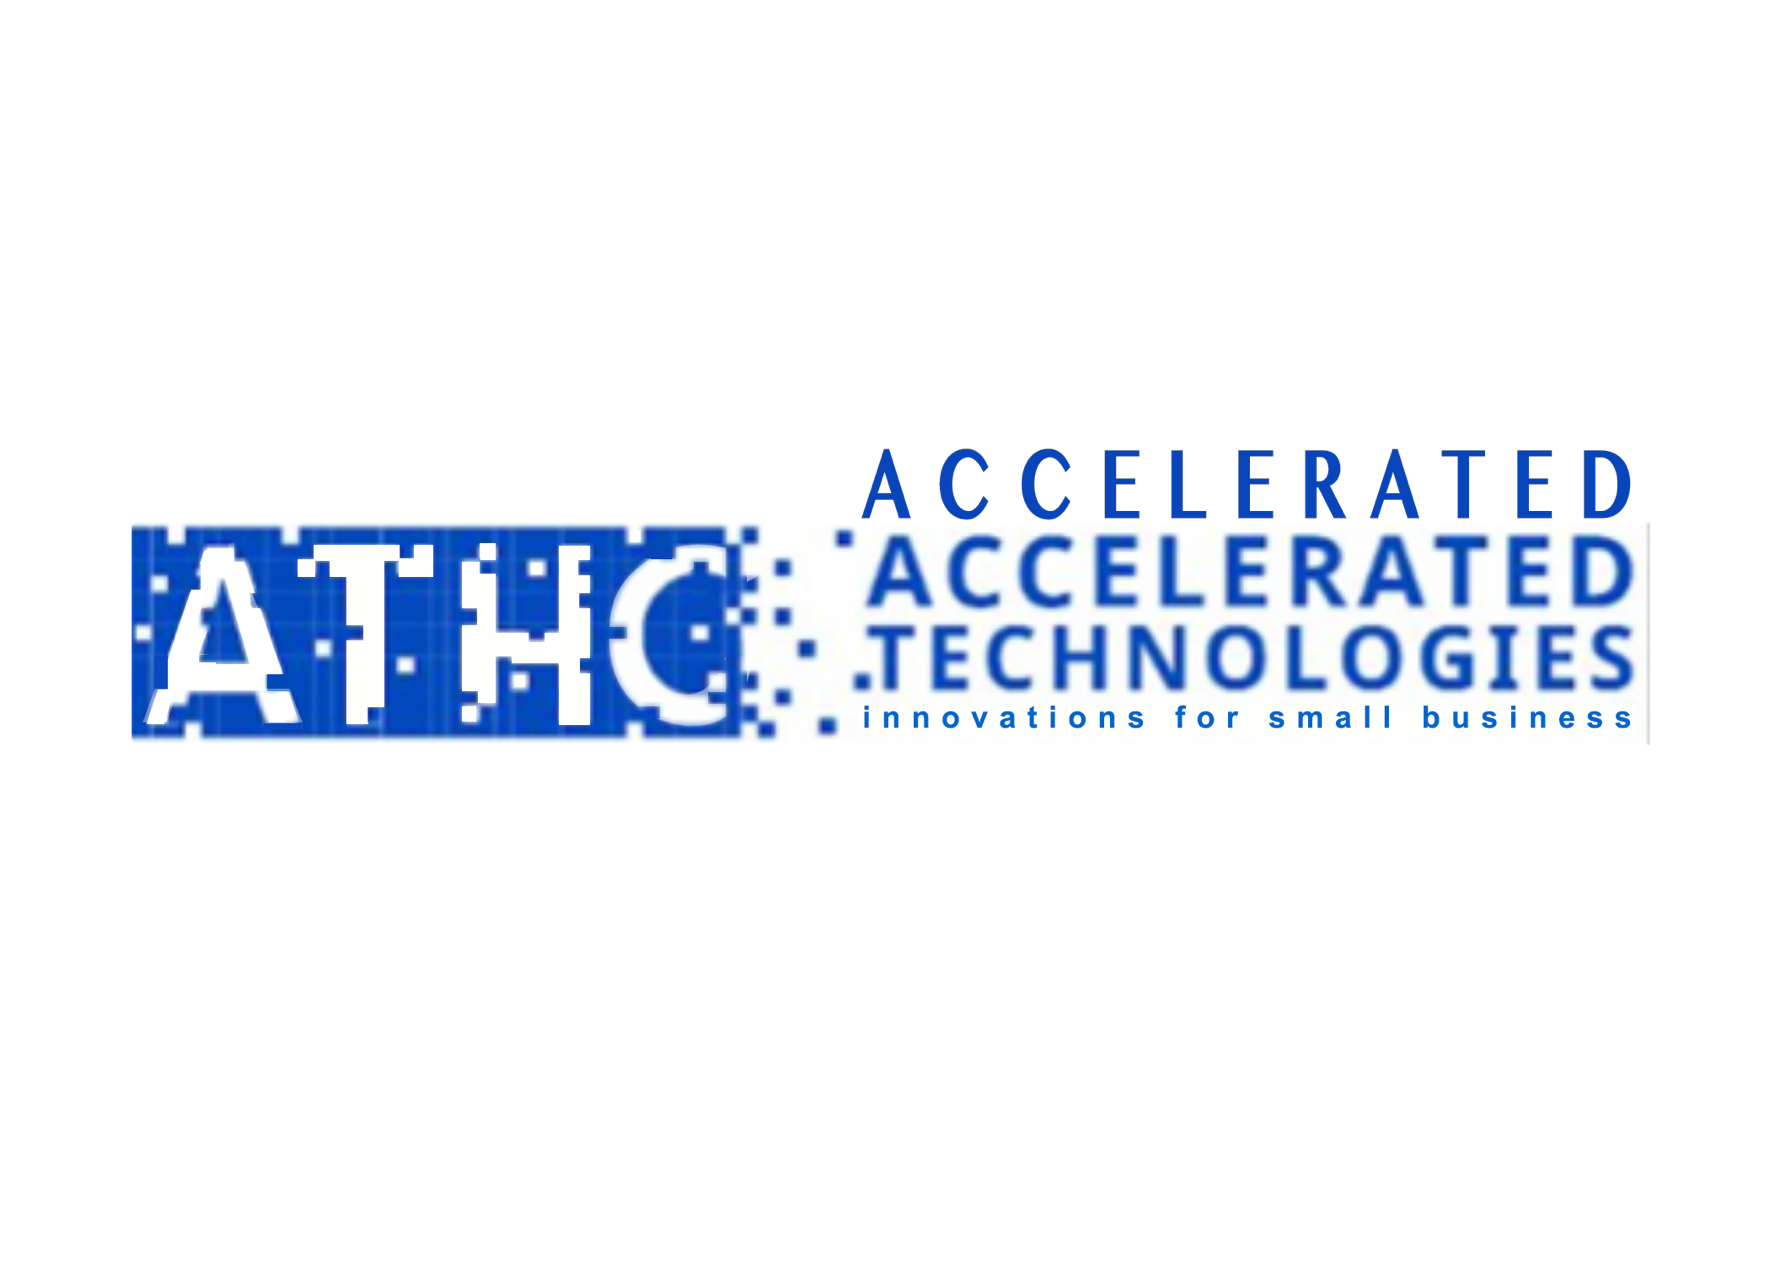 Accelerated Technologies Holding Corp., Sunday, July 10, 2022, Press release picture